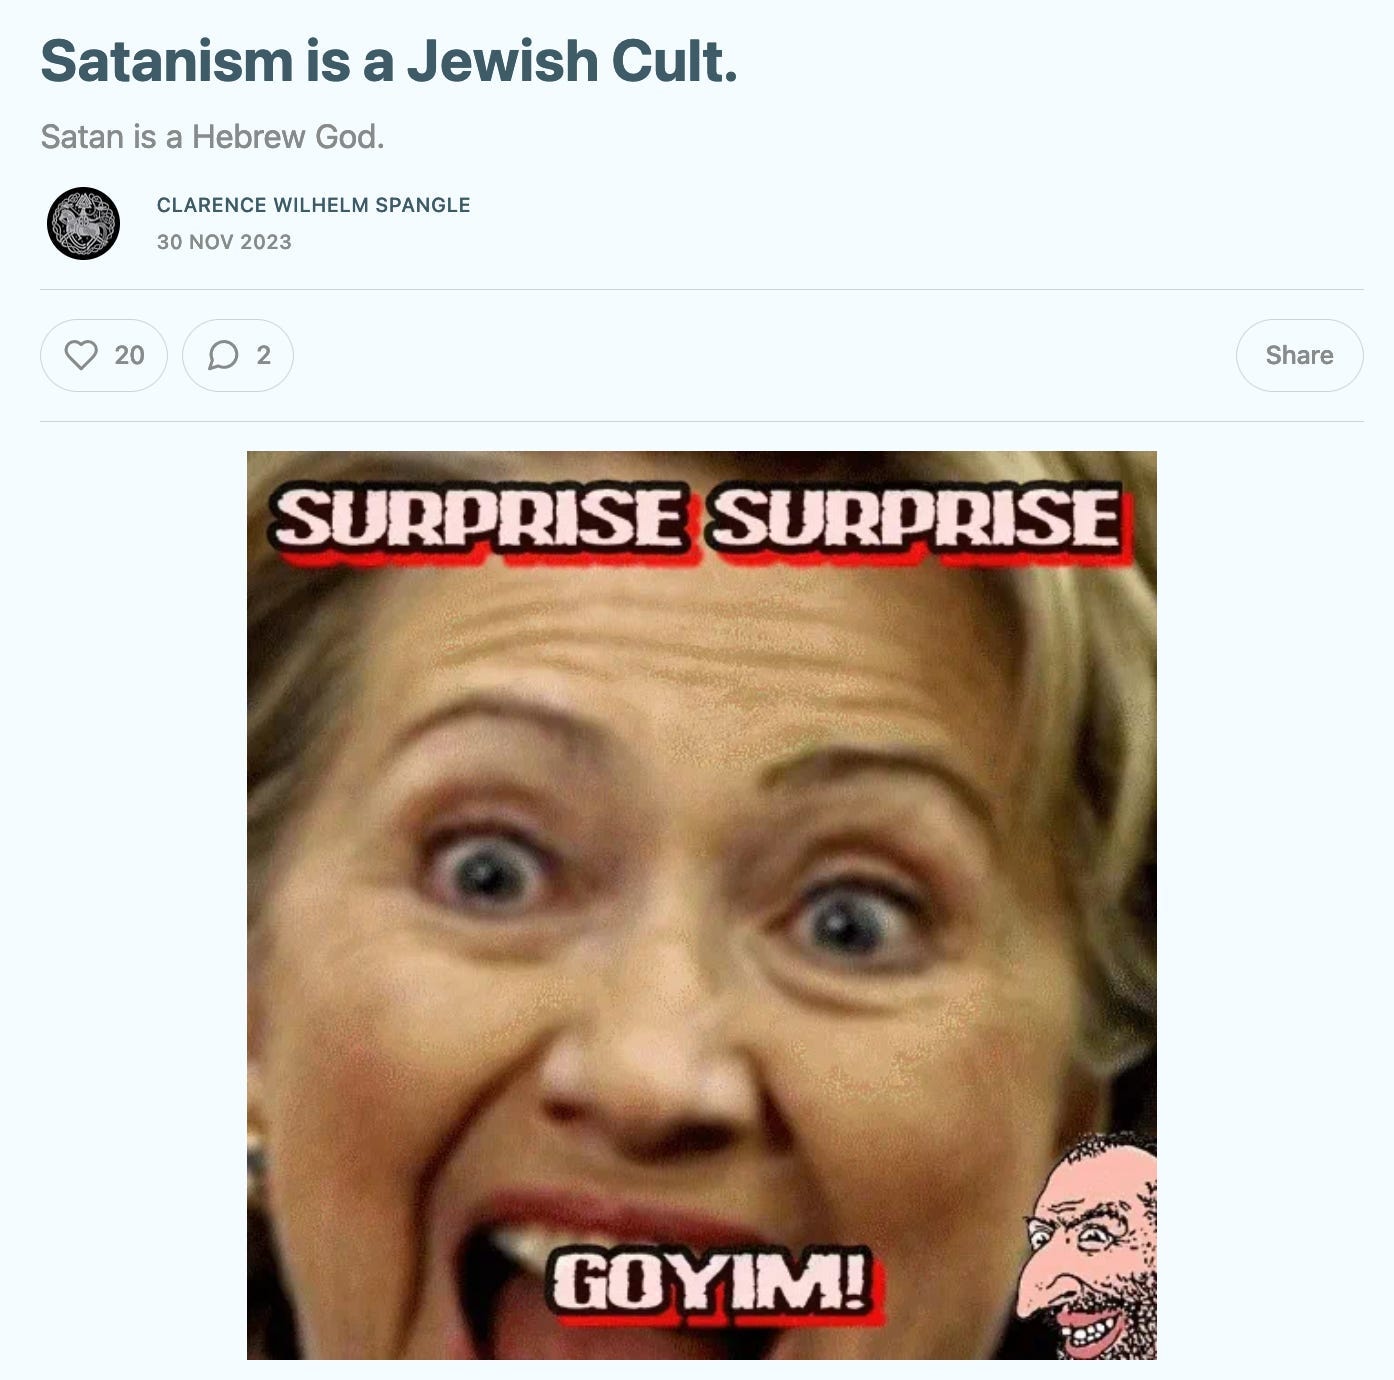 A screenshot of an article on the Nazi Substack Nordic Pagan Soldier. Hillary Clinton is pictured with an anti-Semitic caricature saying "GOYIM!"